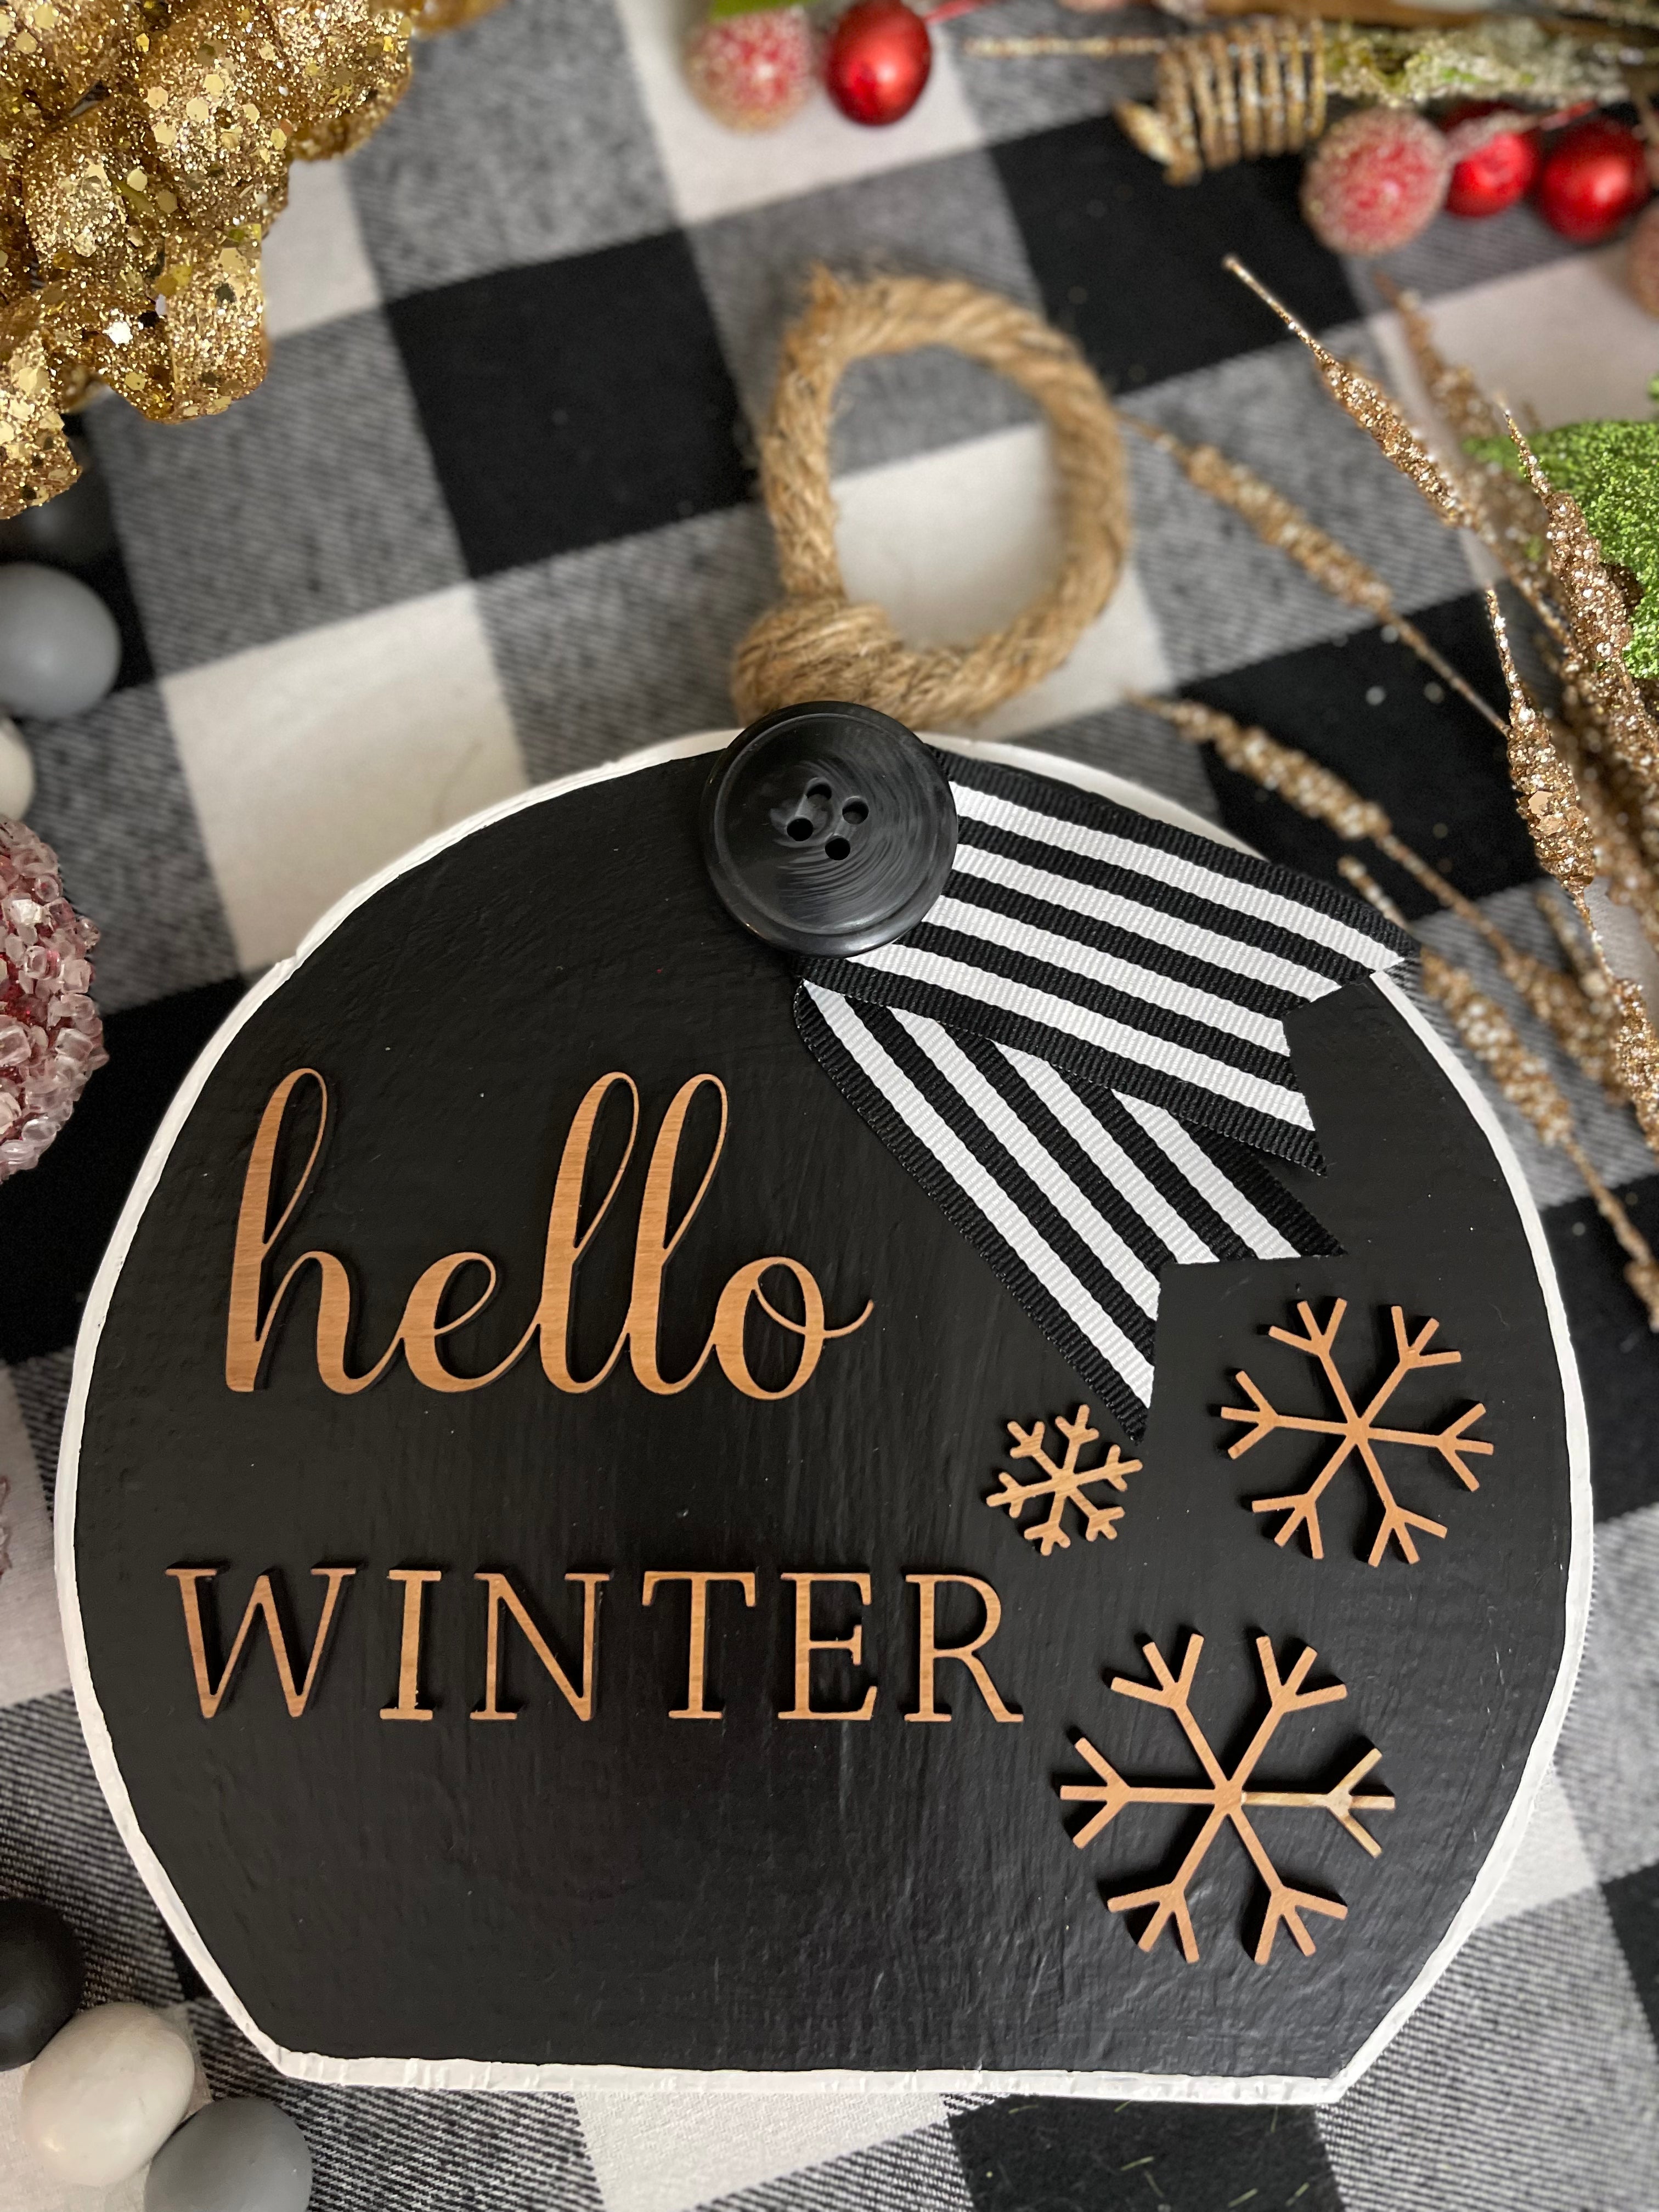 This image shows the Hello Winter large black ornament.